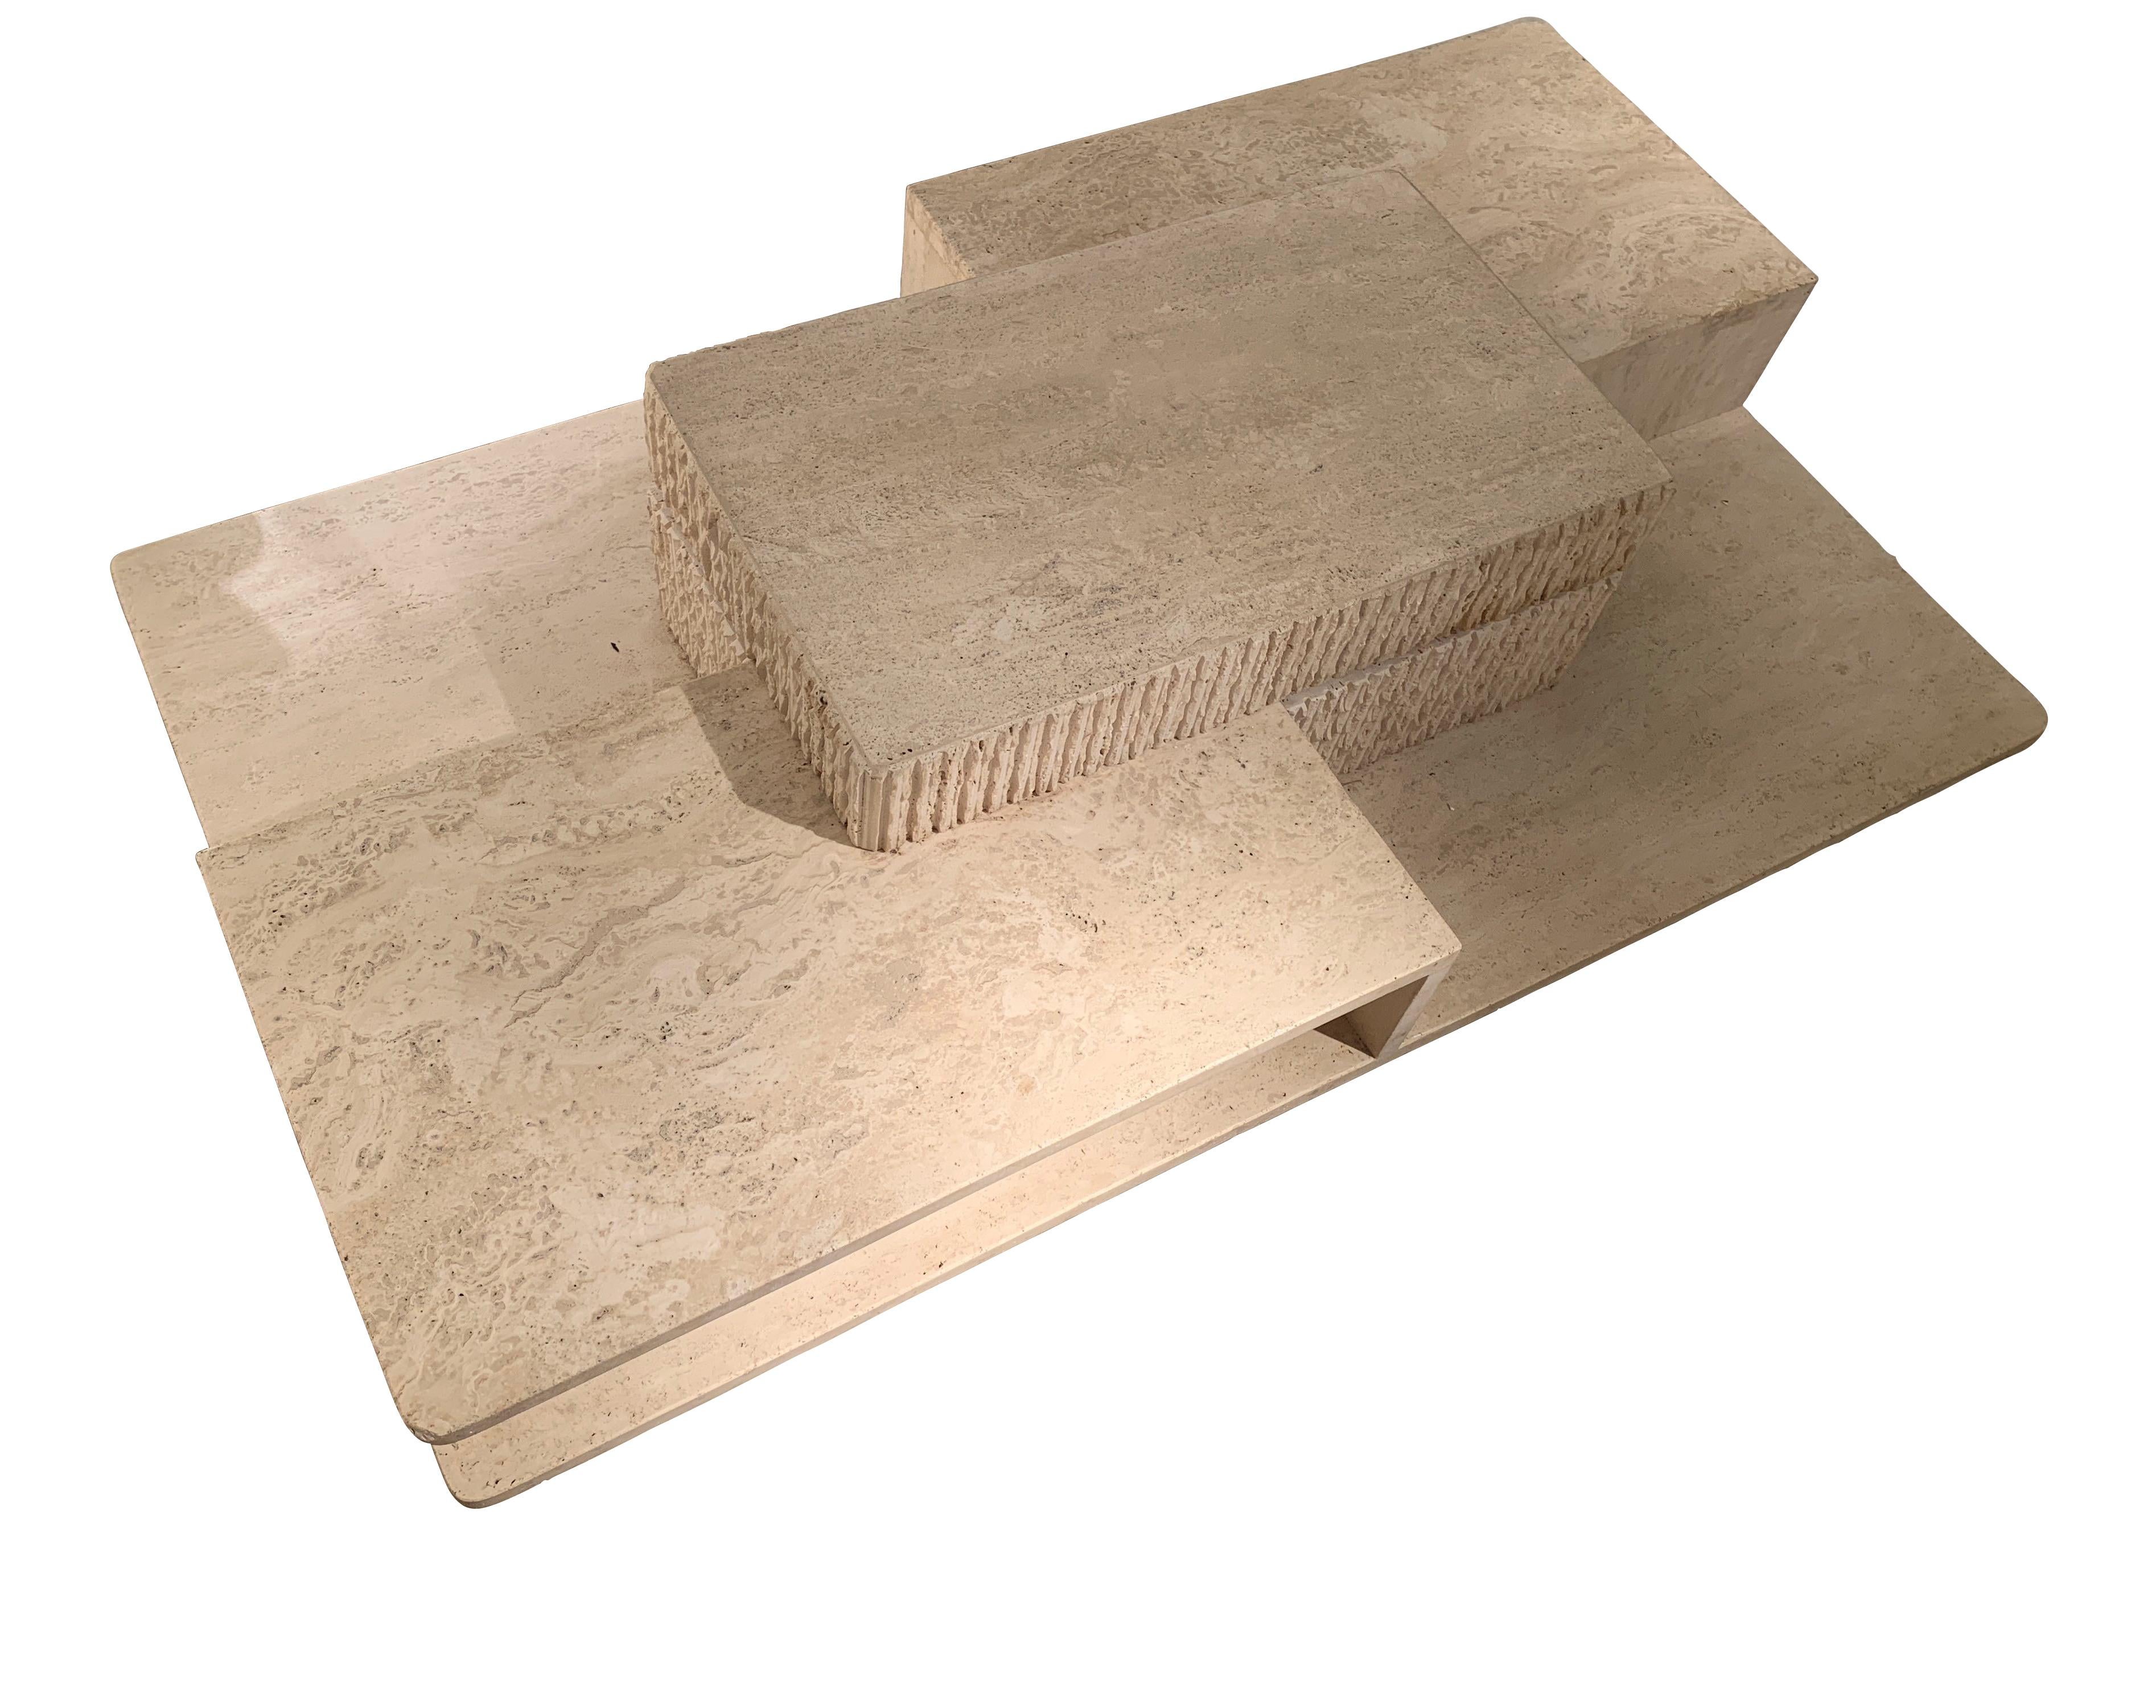 1970s French multi level travertine coffee table
Honed and unfilled finish
Partial decorative chiselled design on 
       